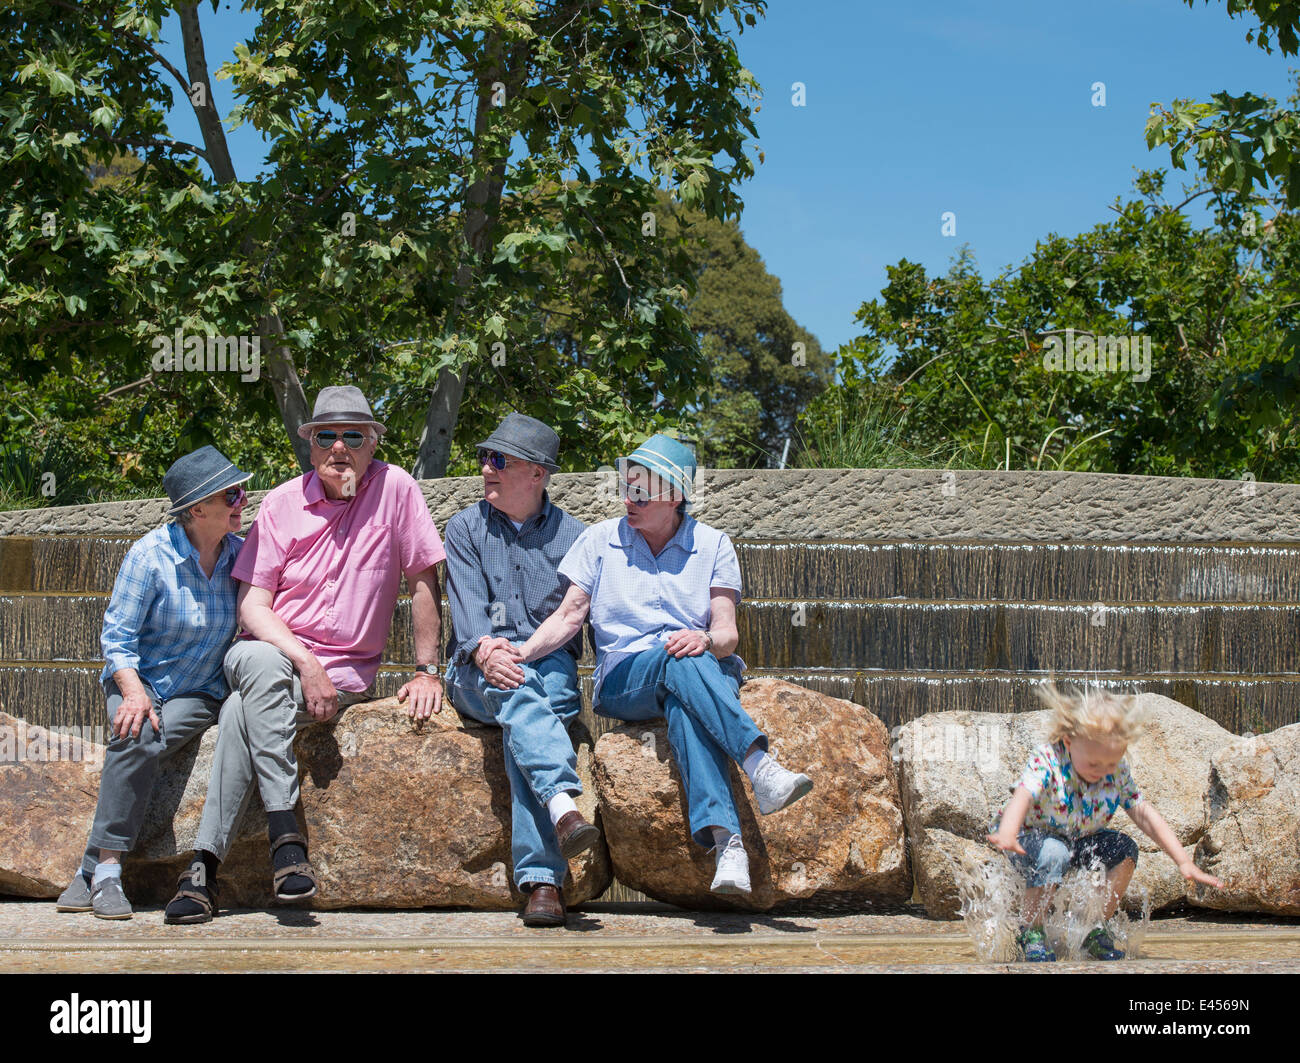 Grandparents sitting in park and grandson splashing in water Stock Photo